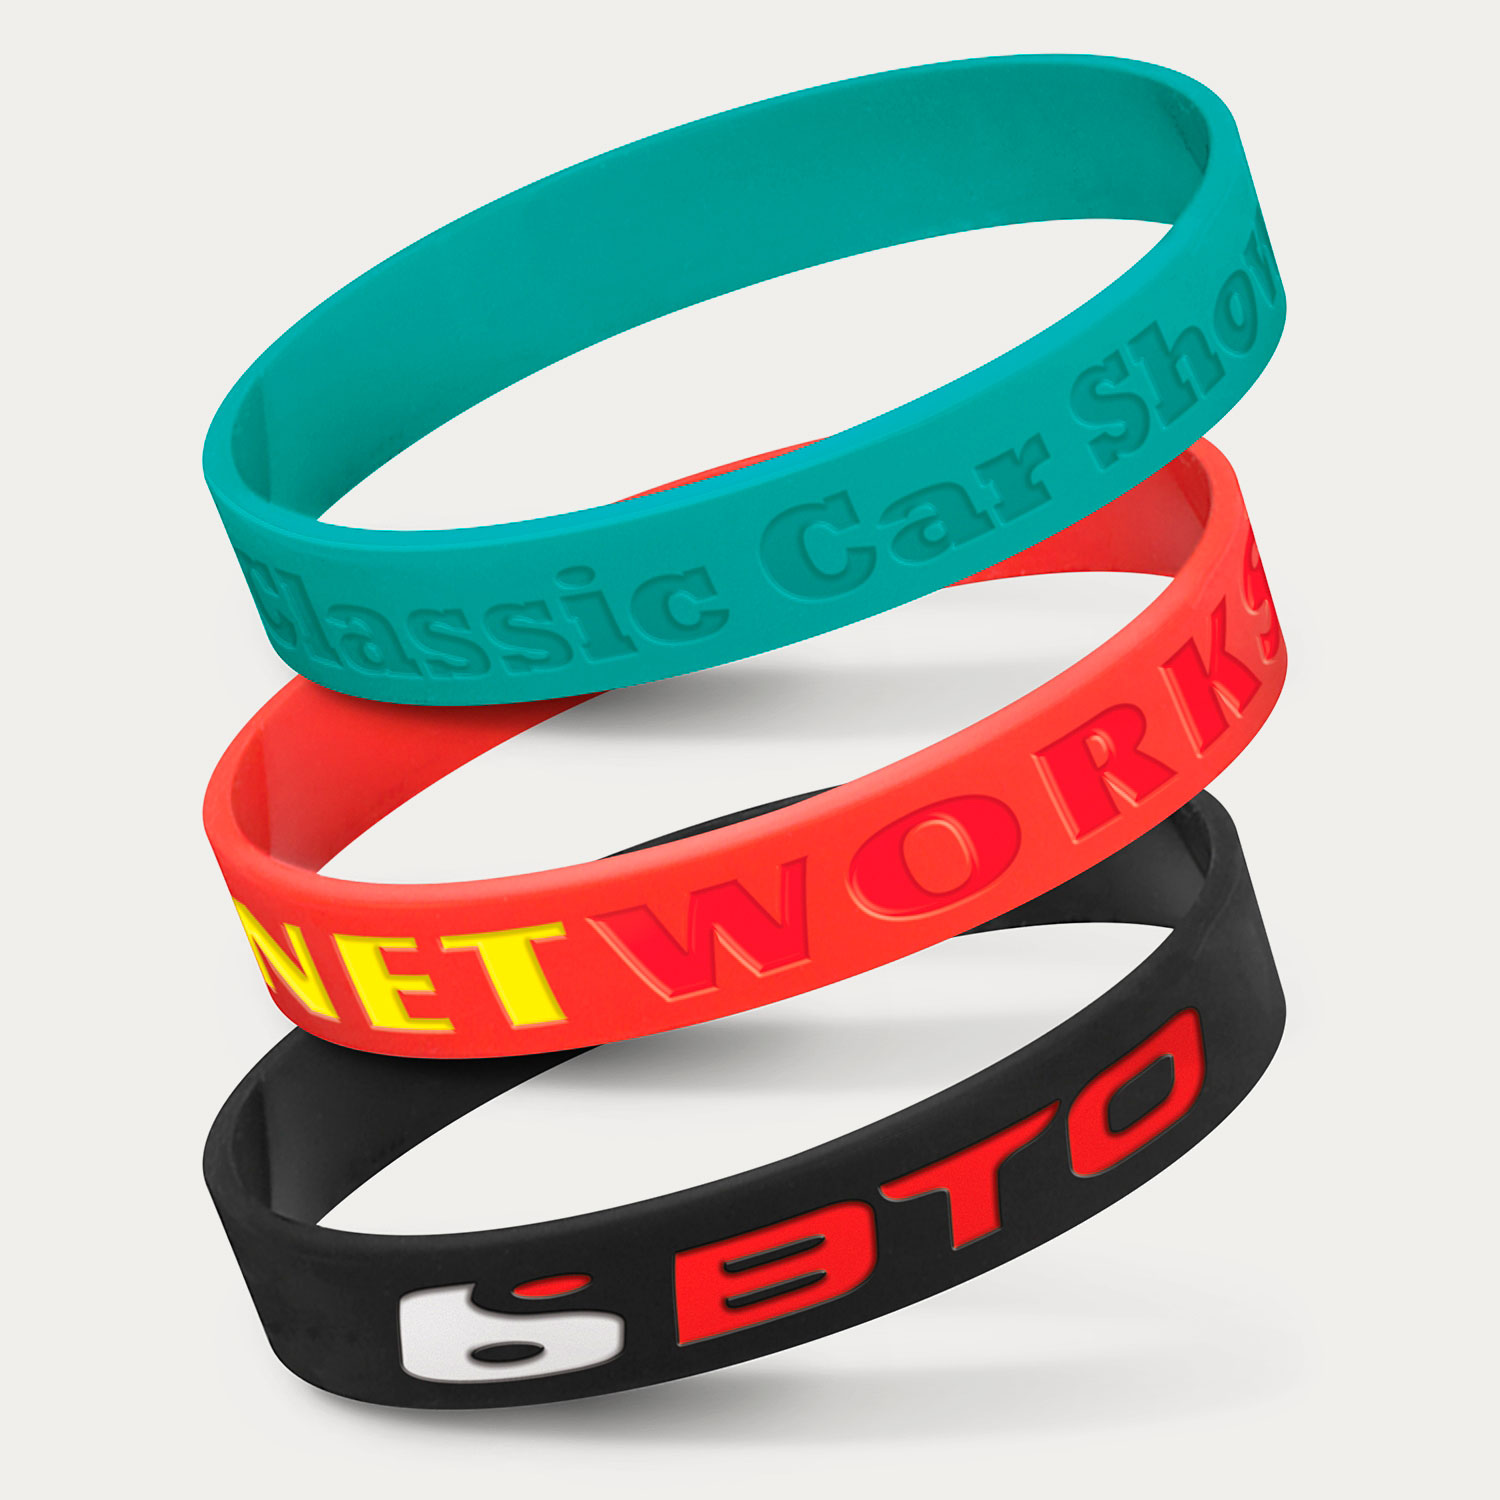 Debossed Silicone Wristband, Custom Debossed Silicone Wristband  Manufacturer,Exporter